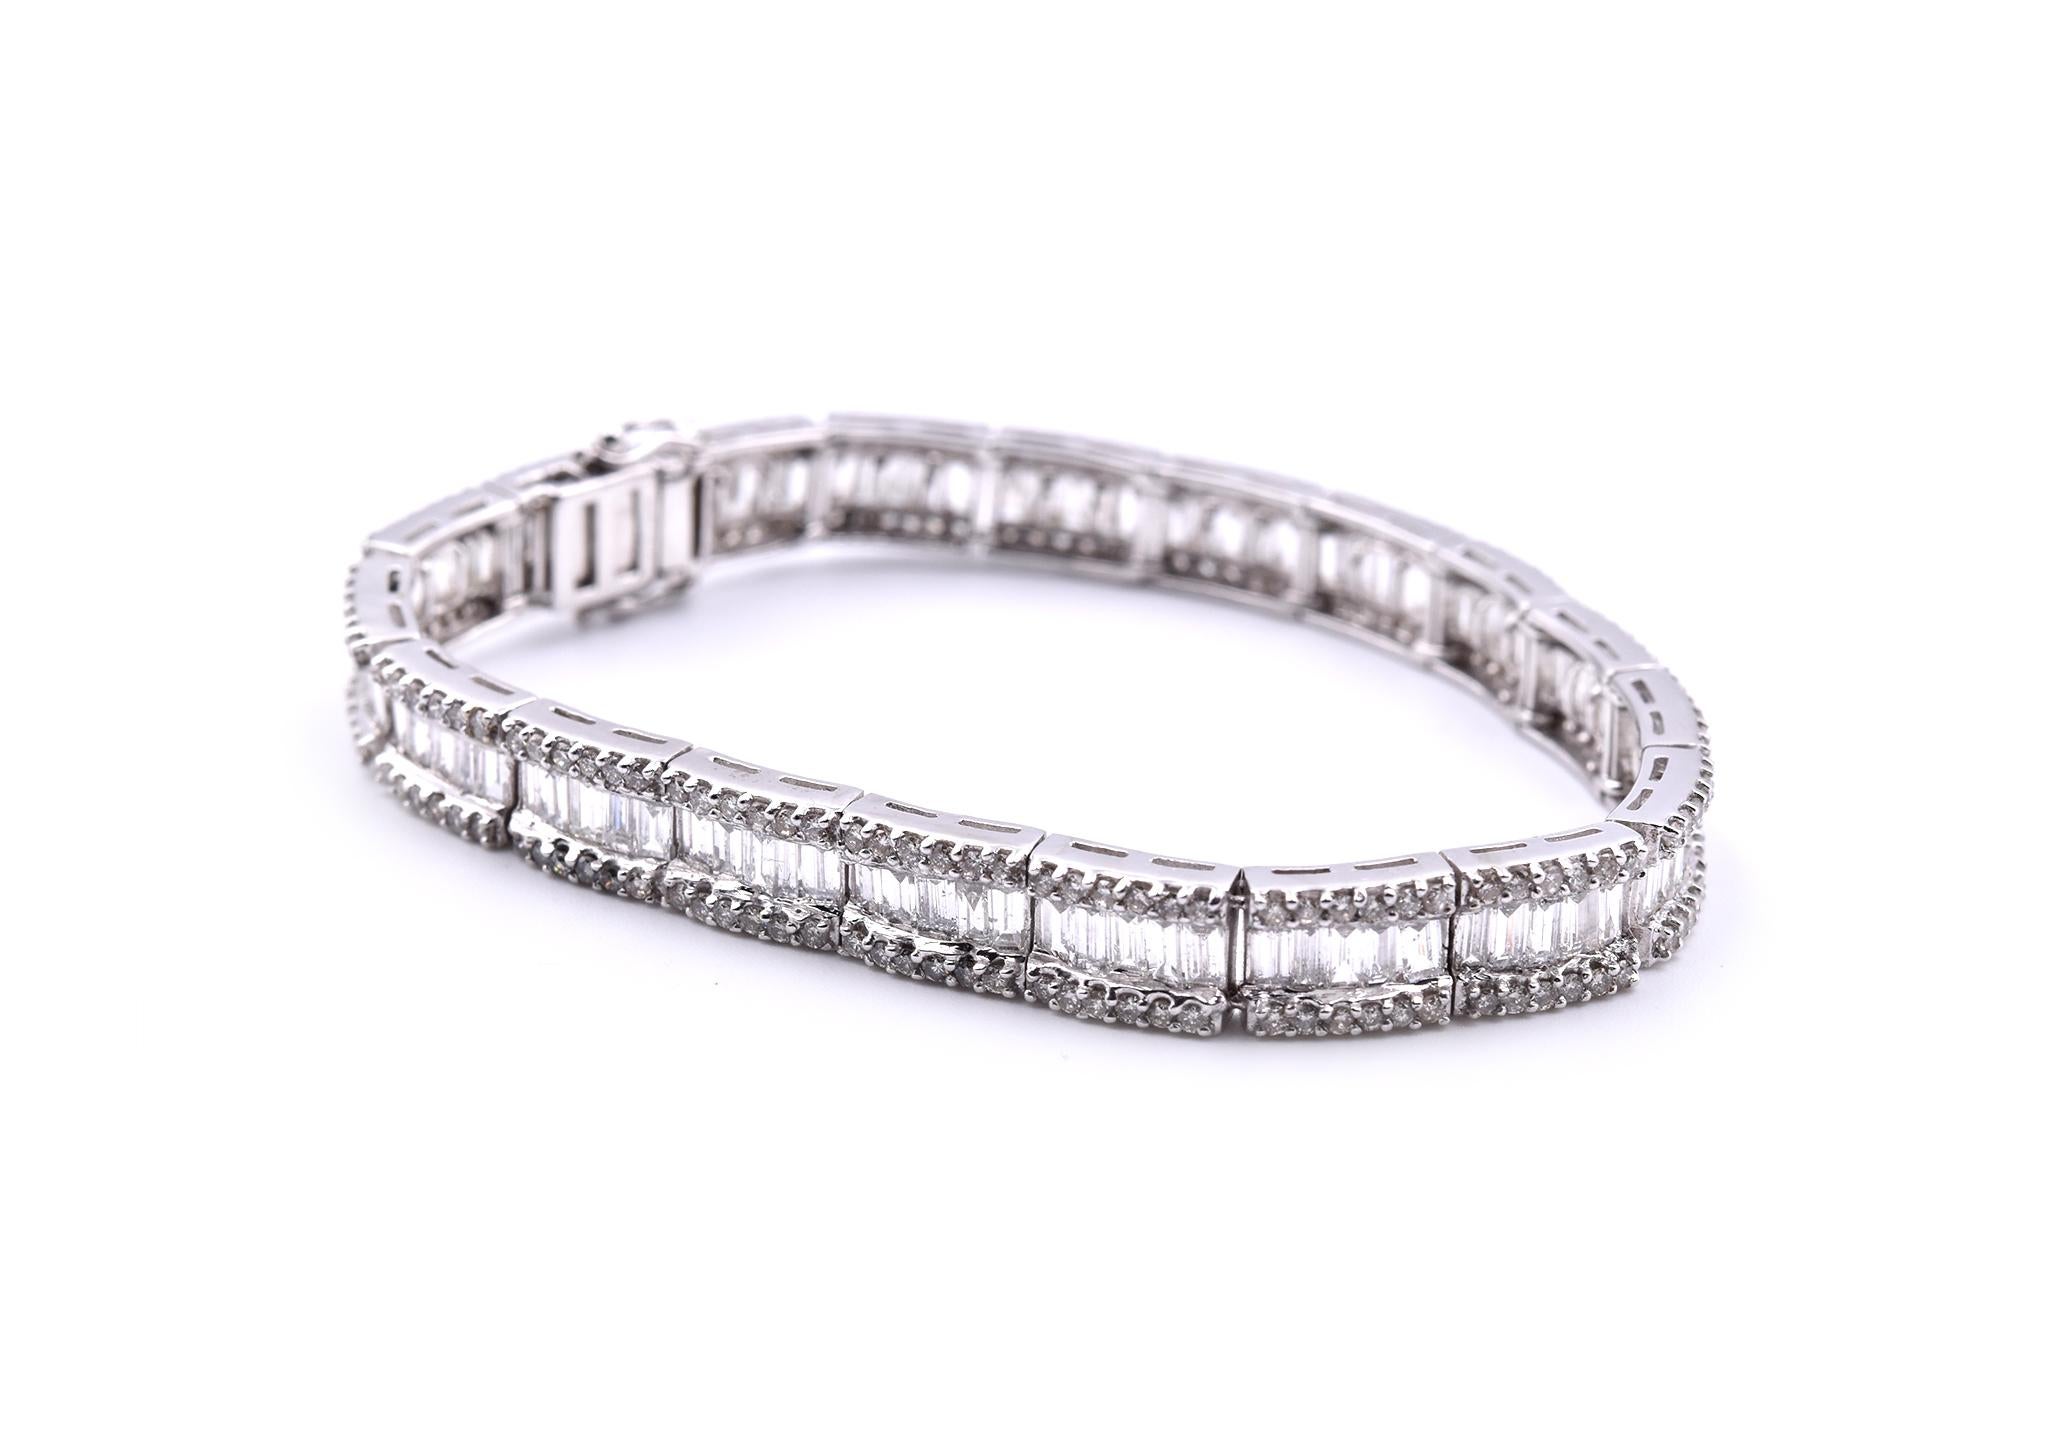 Designer: signed BJC 
Material: 18k white gold
Diamonds: 95 baguette cut= 2.28cttw
Color: G
Clarity: VS
Diamonds: 228 round brilliant cut= 2.85cttw
Color: G
Clarity: VS
Dimensions: bracelet will fit a 6 ¼-inch wrist and it is 7.19mm wide
Weight: